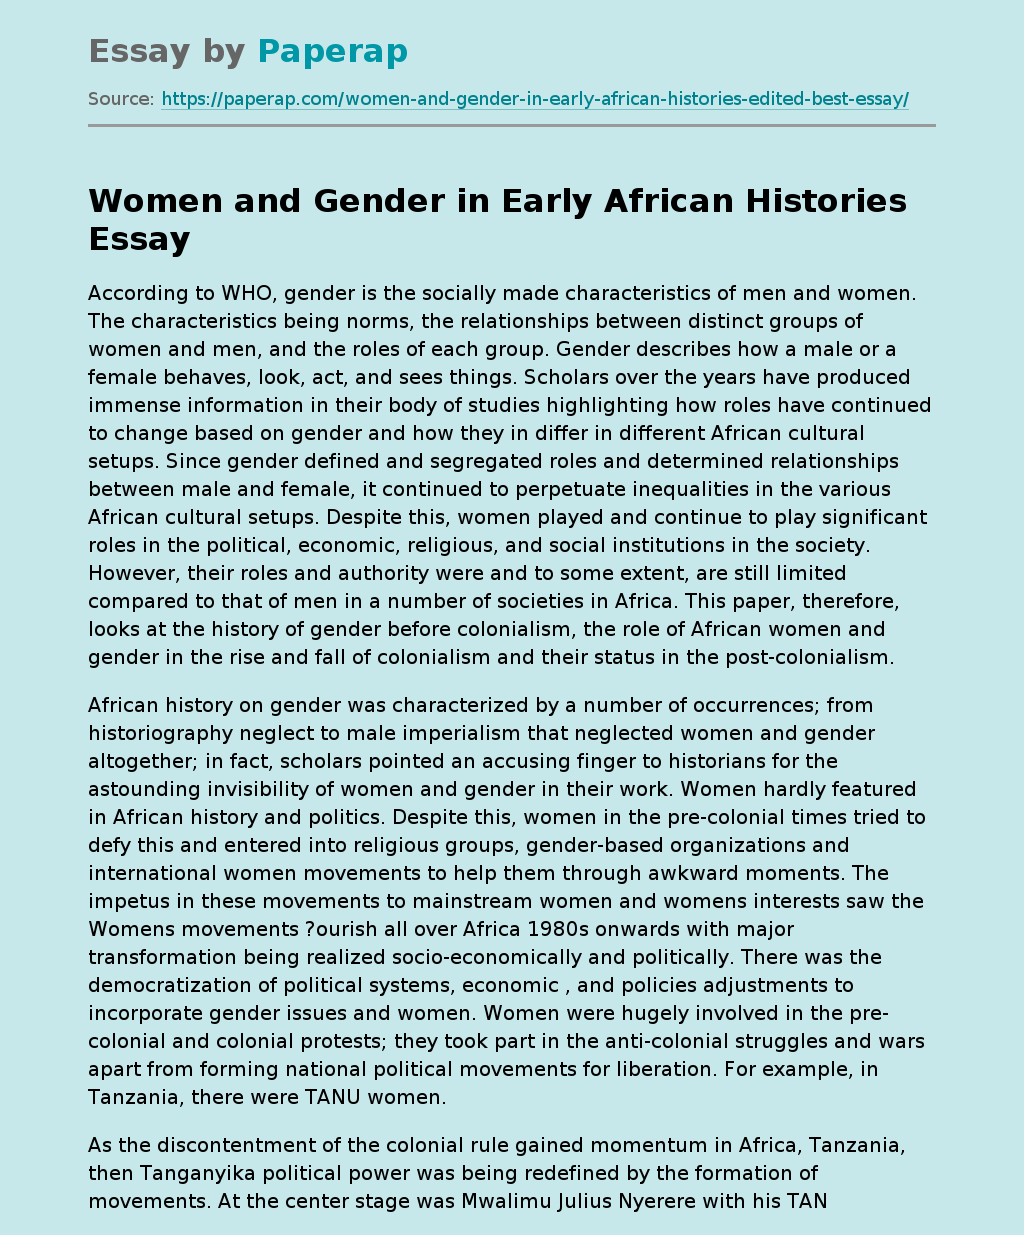 Women and Gender in Early African Histories